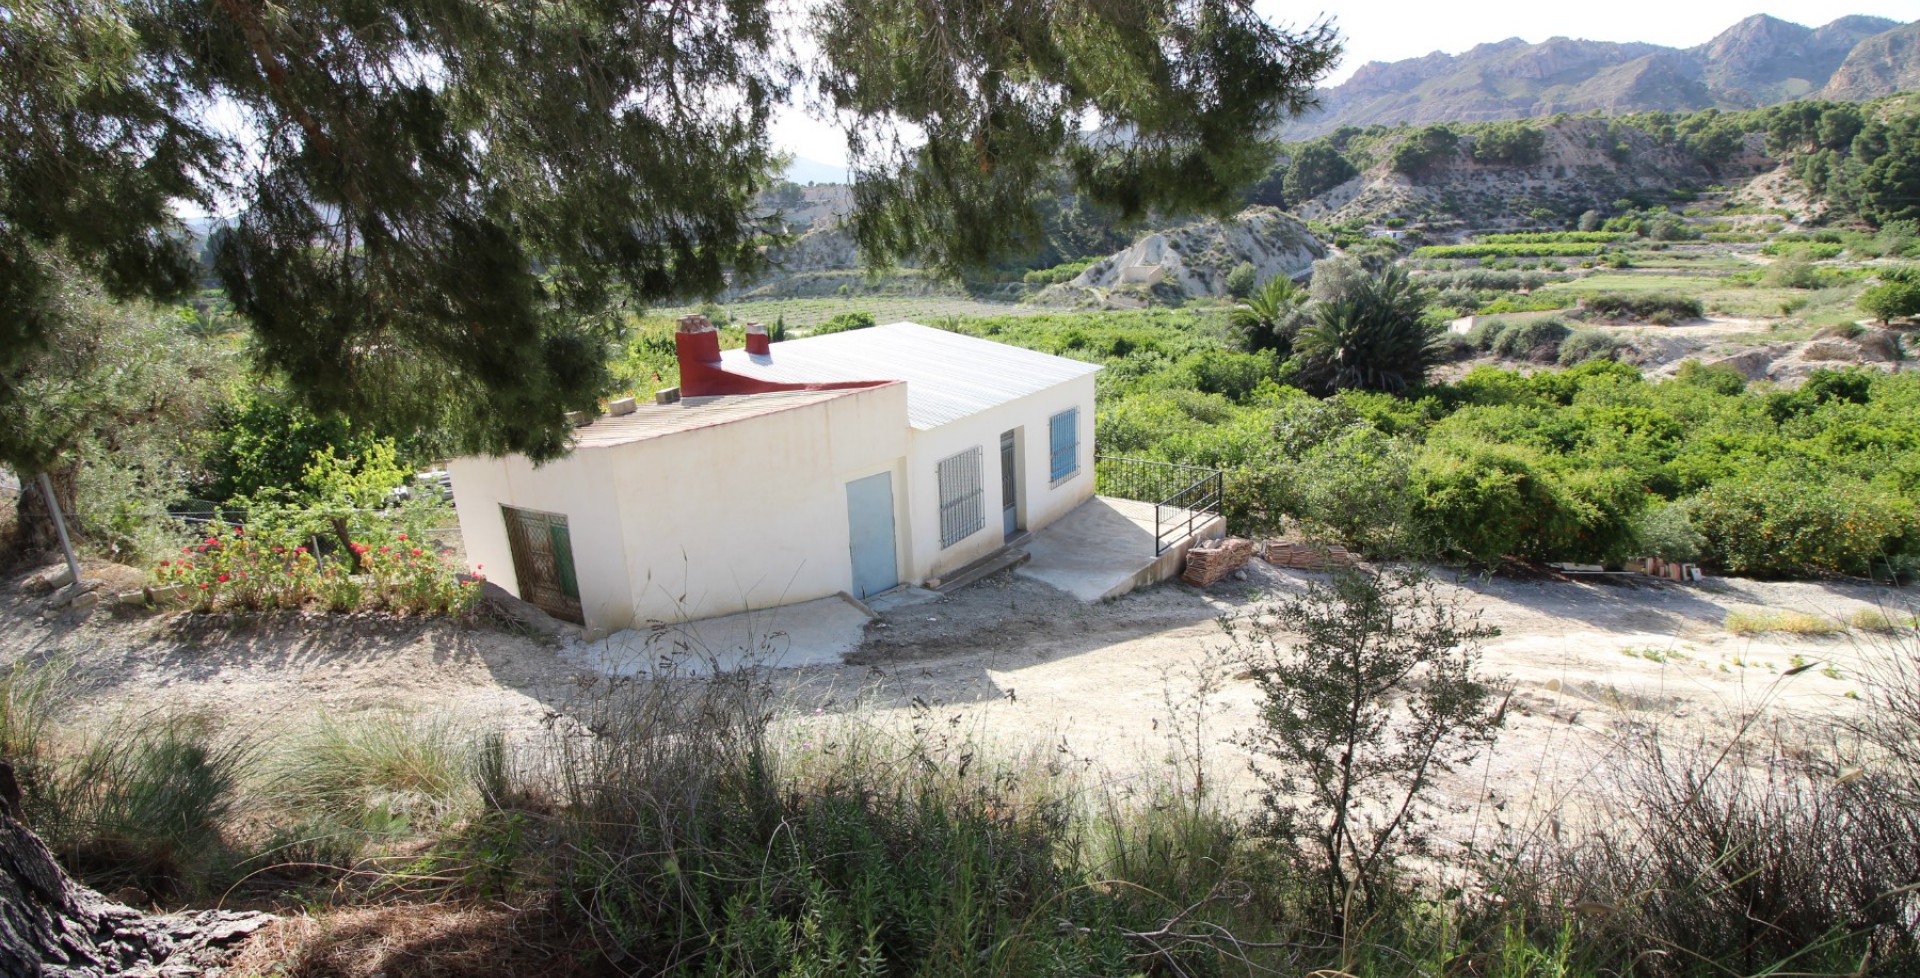 Detached country property with fantastic views, Ulea, Murcia, Spain